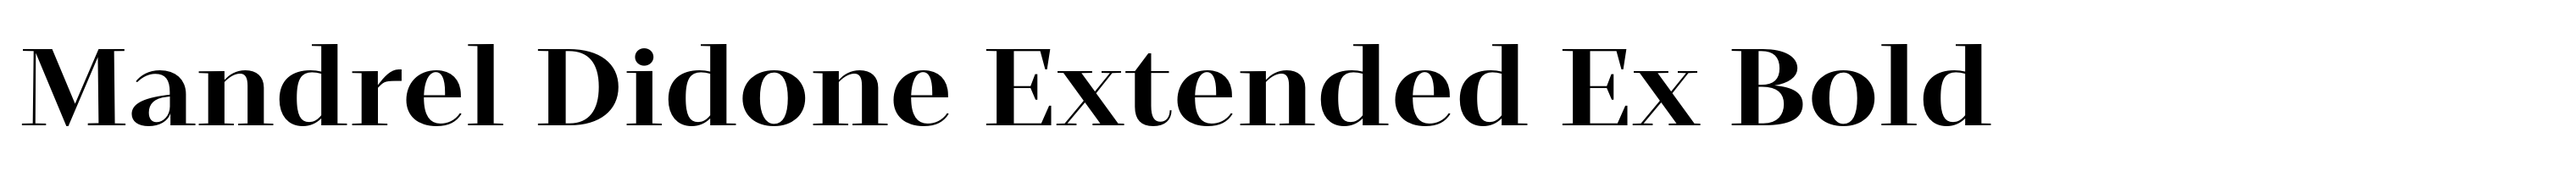 Mandrel Didone Extended Ex Bold